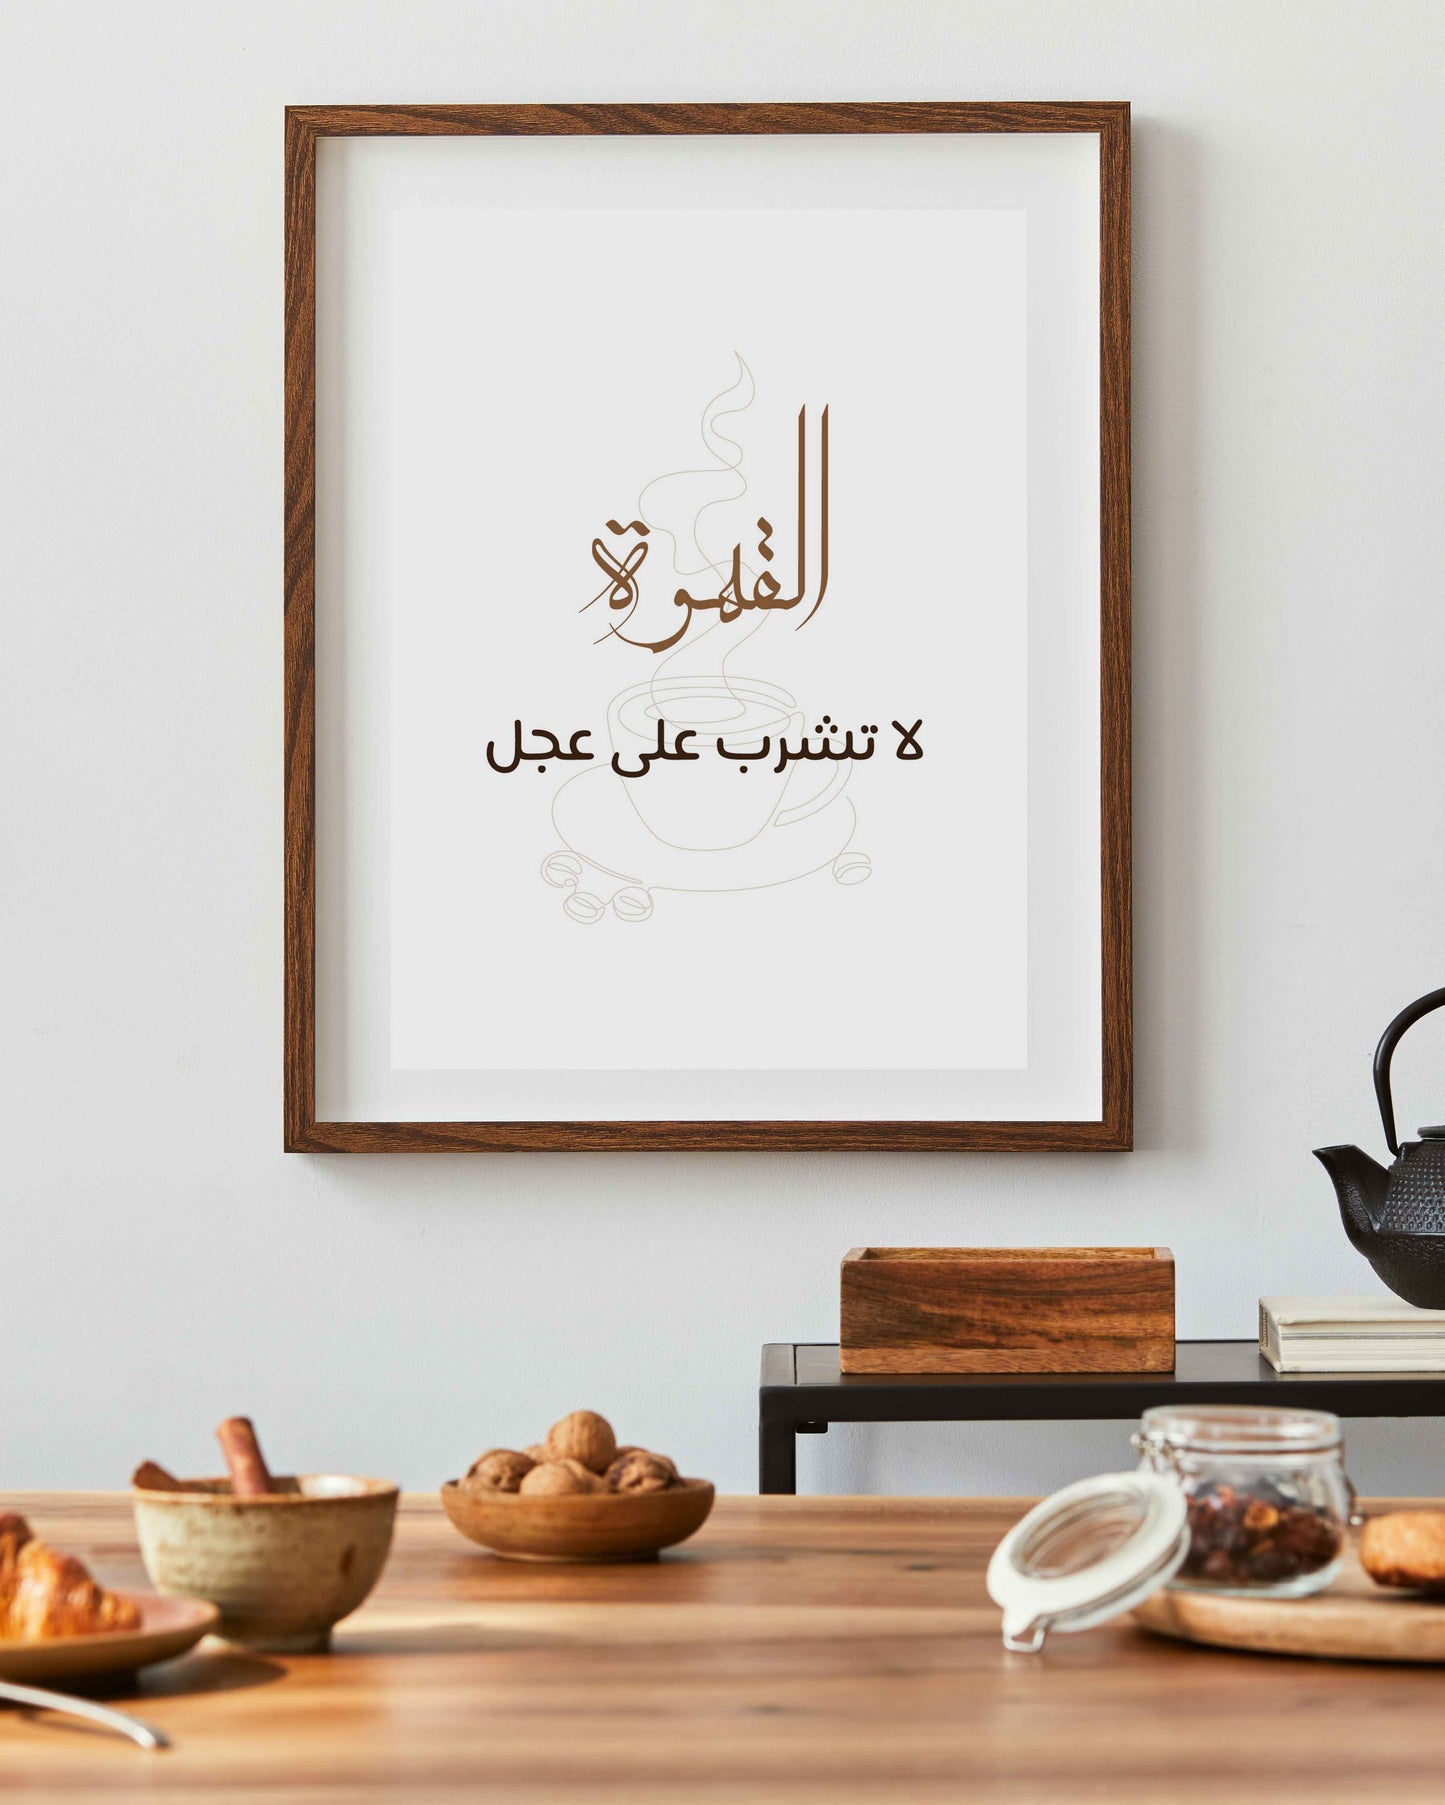 The Coffee don't drink in a hurry in Arabic Poster